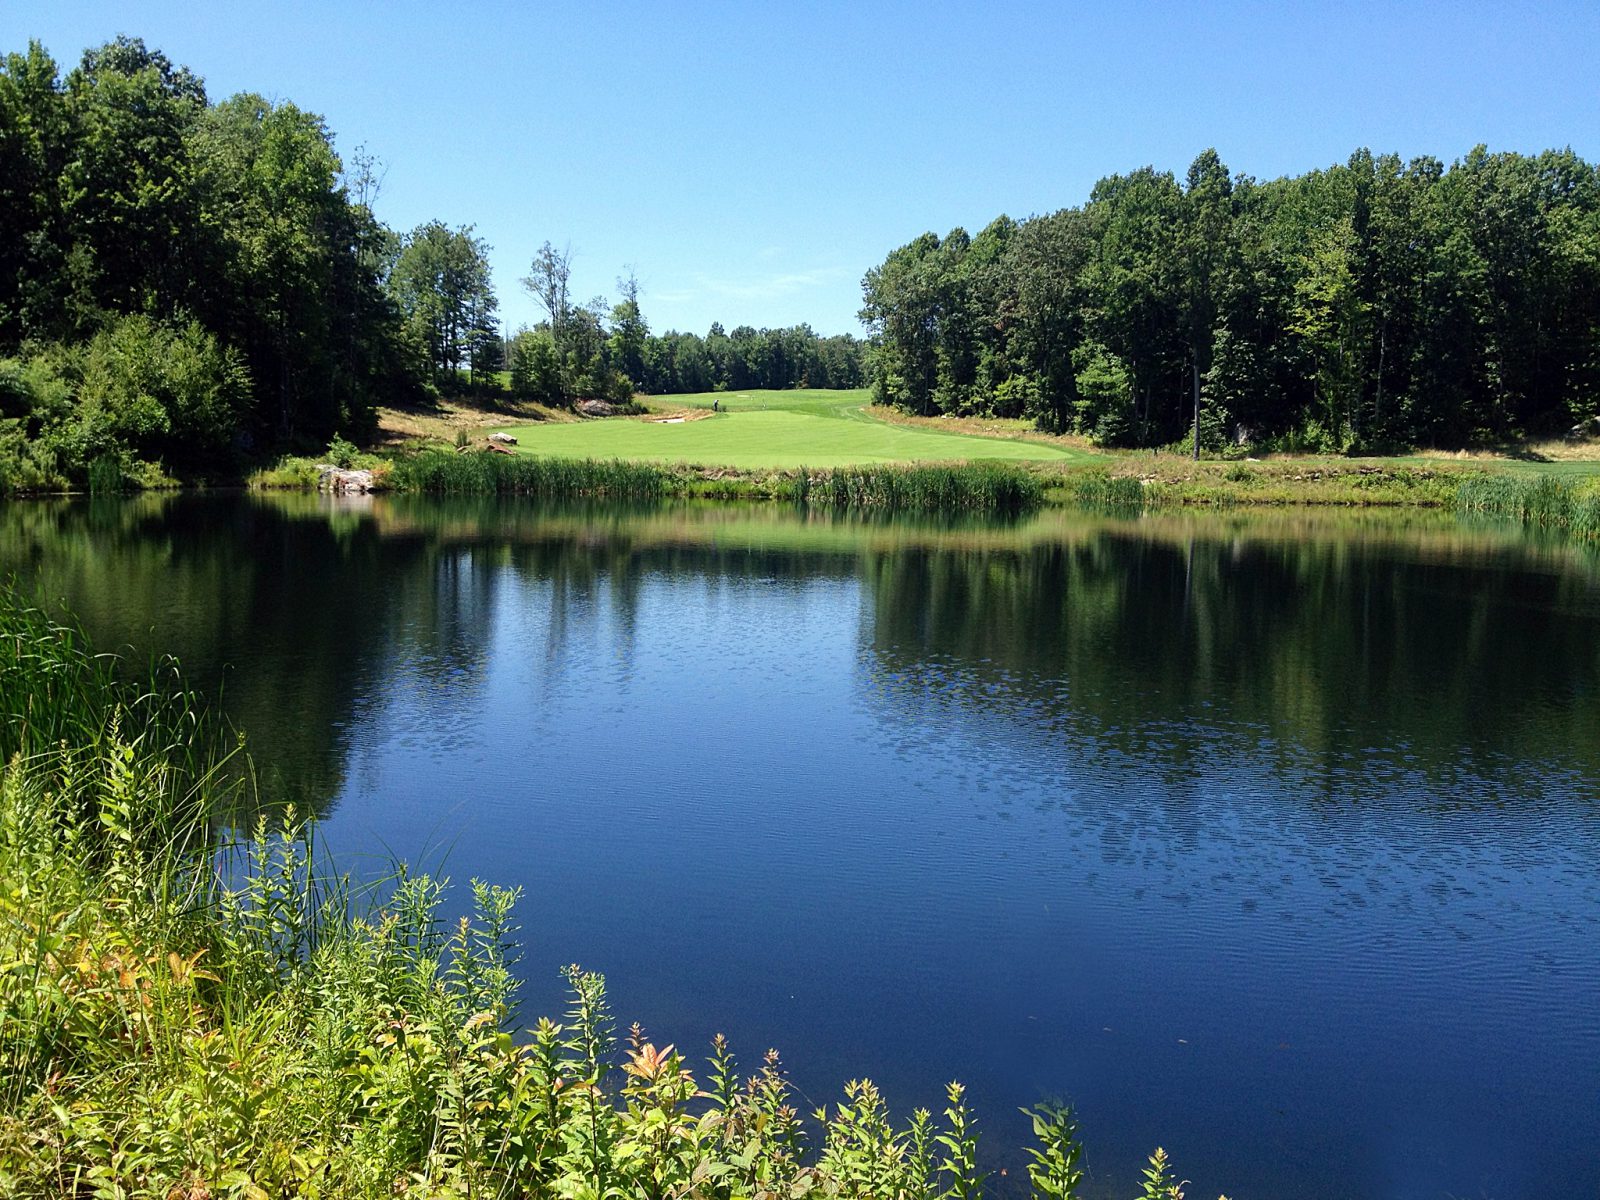 Golf course management (1) - scenic - solitude lake and pond management